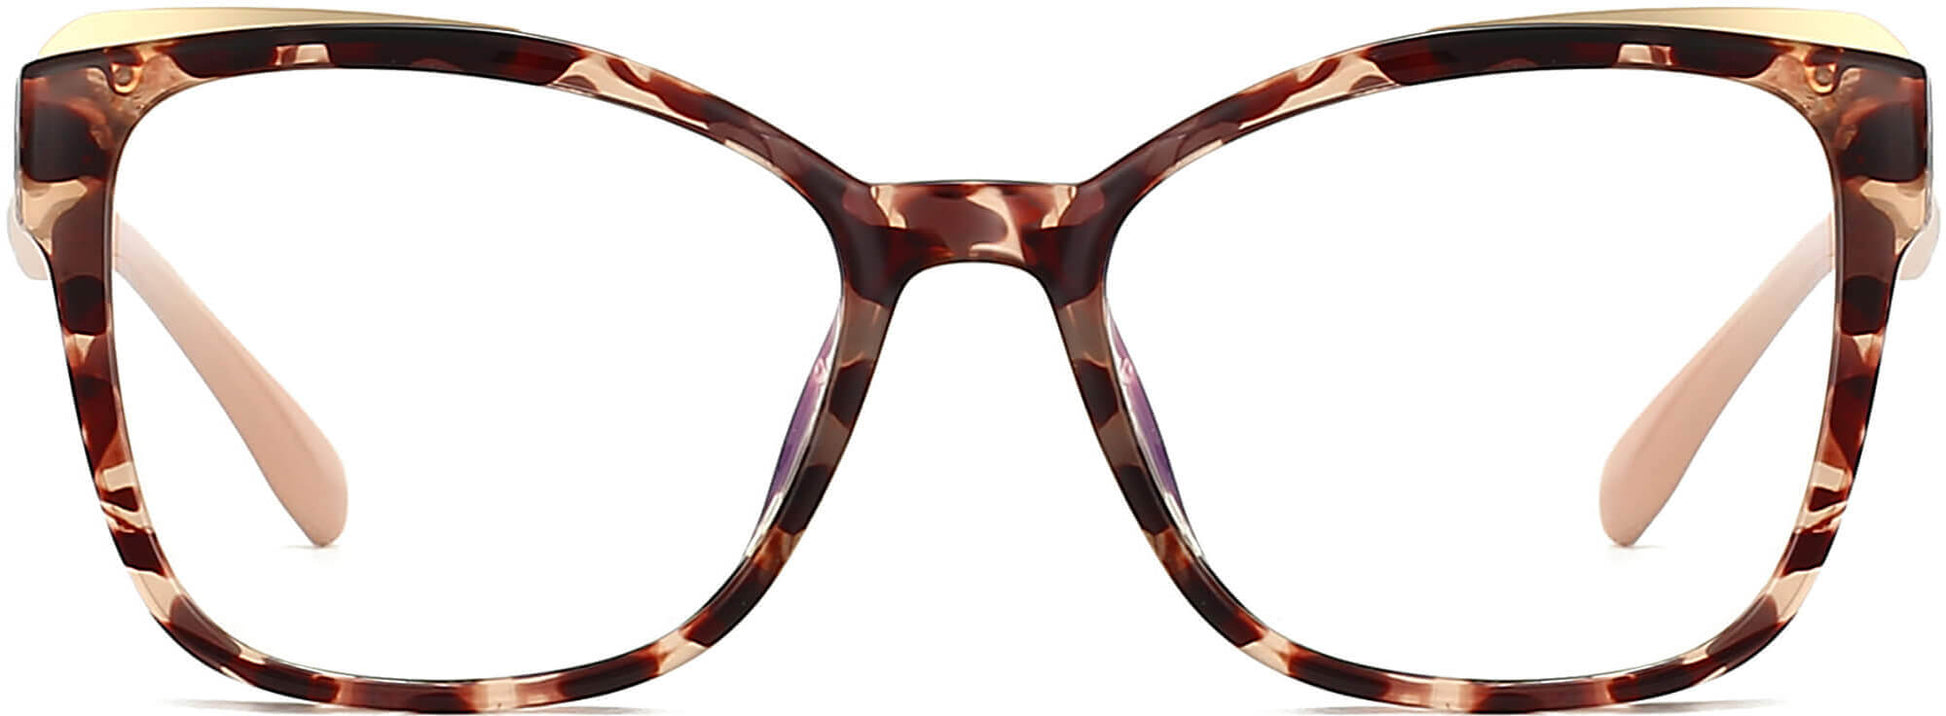 Hannah Cateye Tortoise Eyeglasses from ANRRI, front view